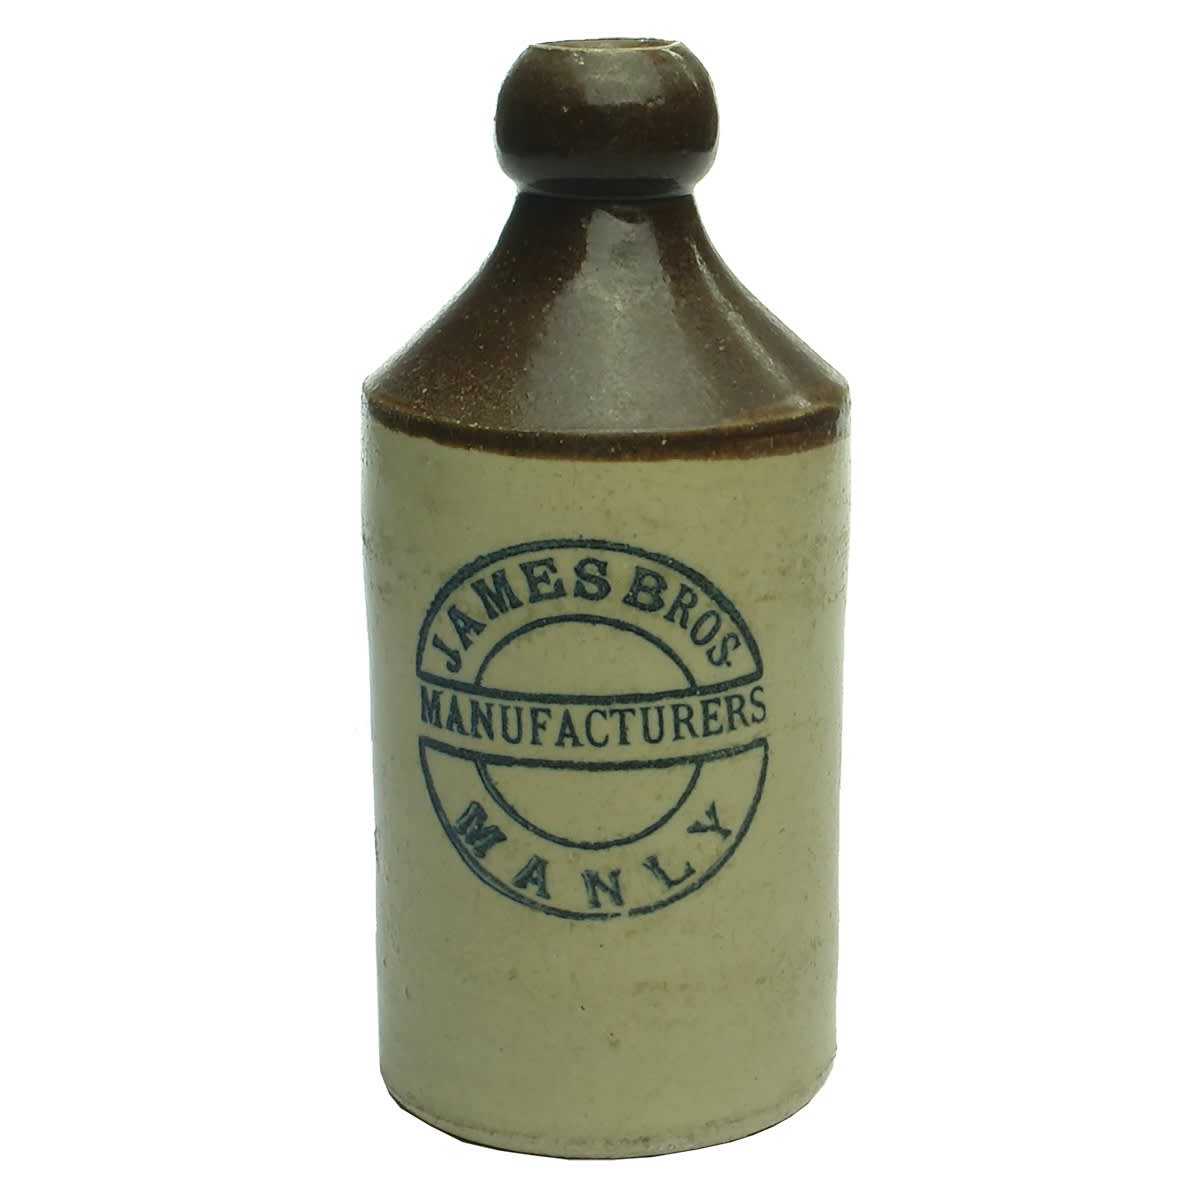 Ginger Beer. James Bros., Manufacturers Manly. Chocolate Brown top. (New South Wales)